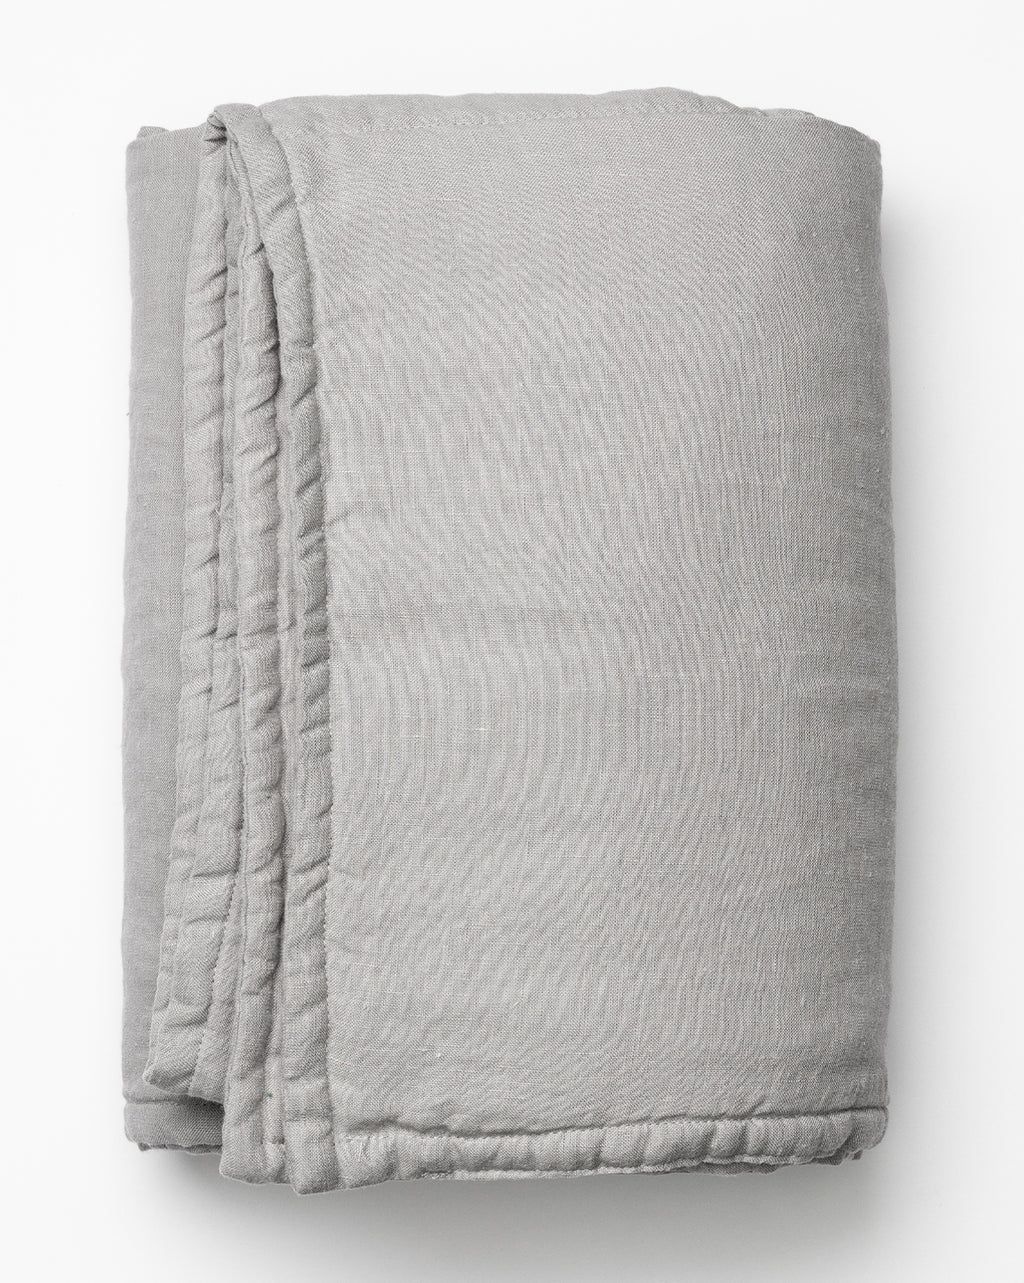 Quilted Linen Blanket | McGee & Co.